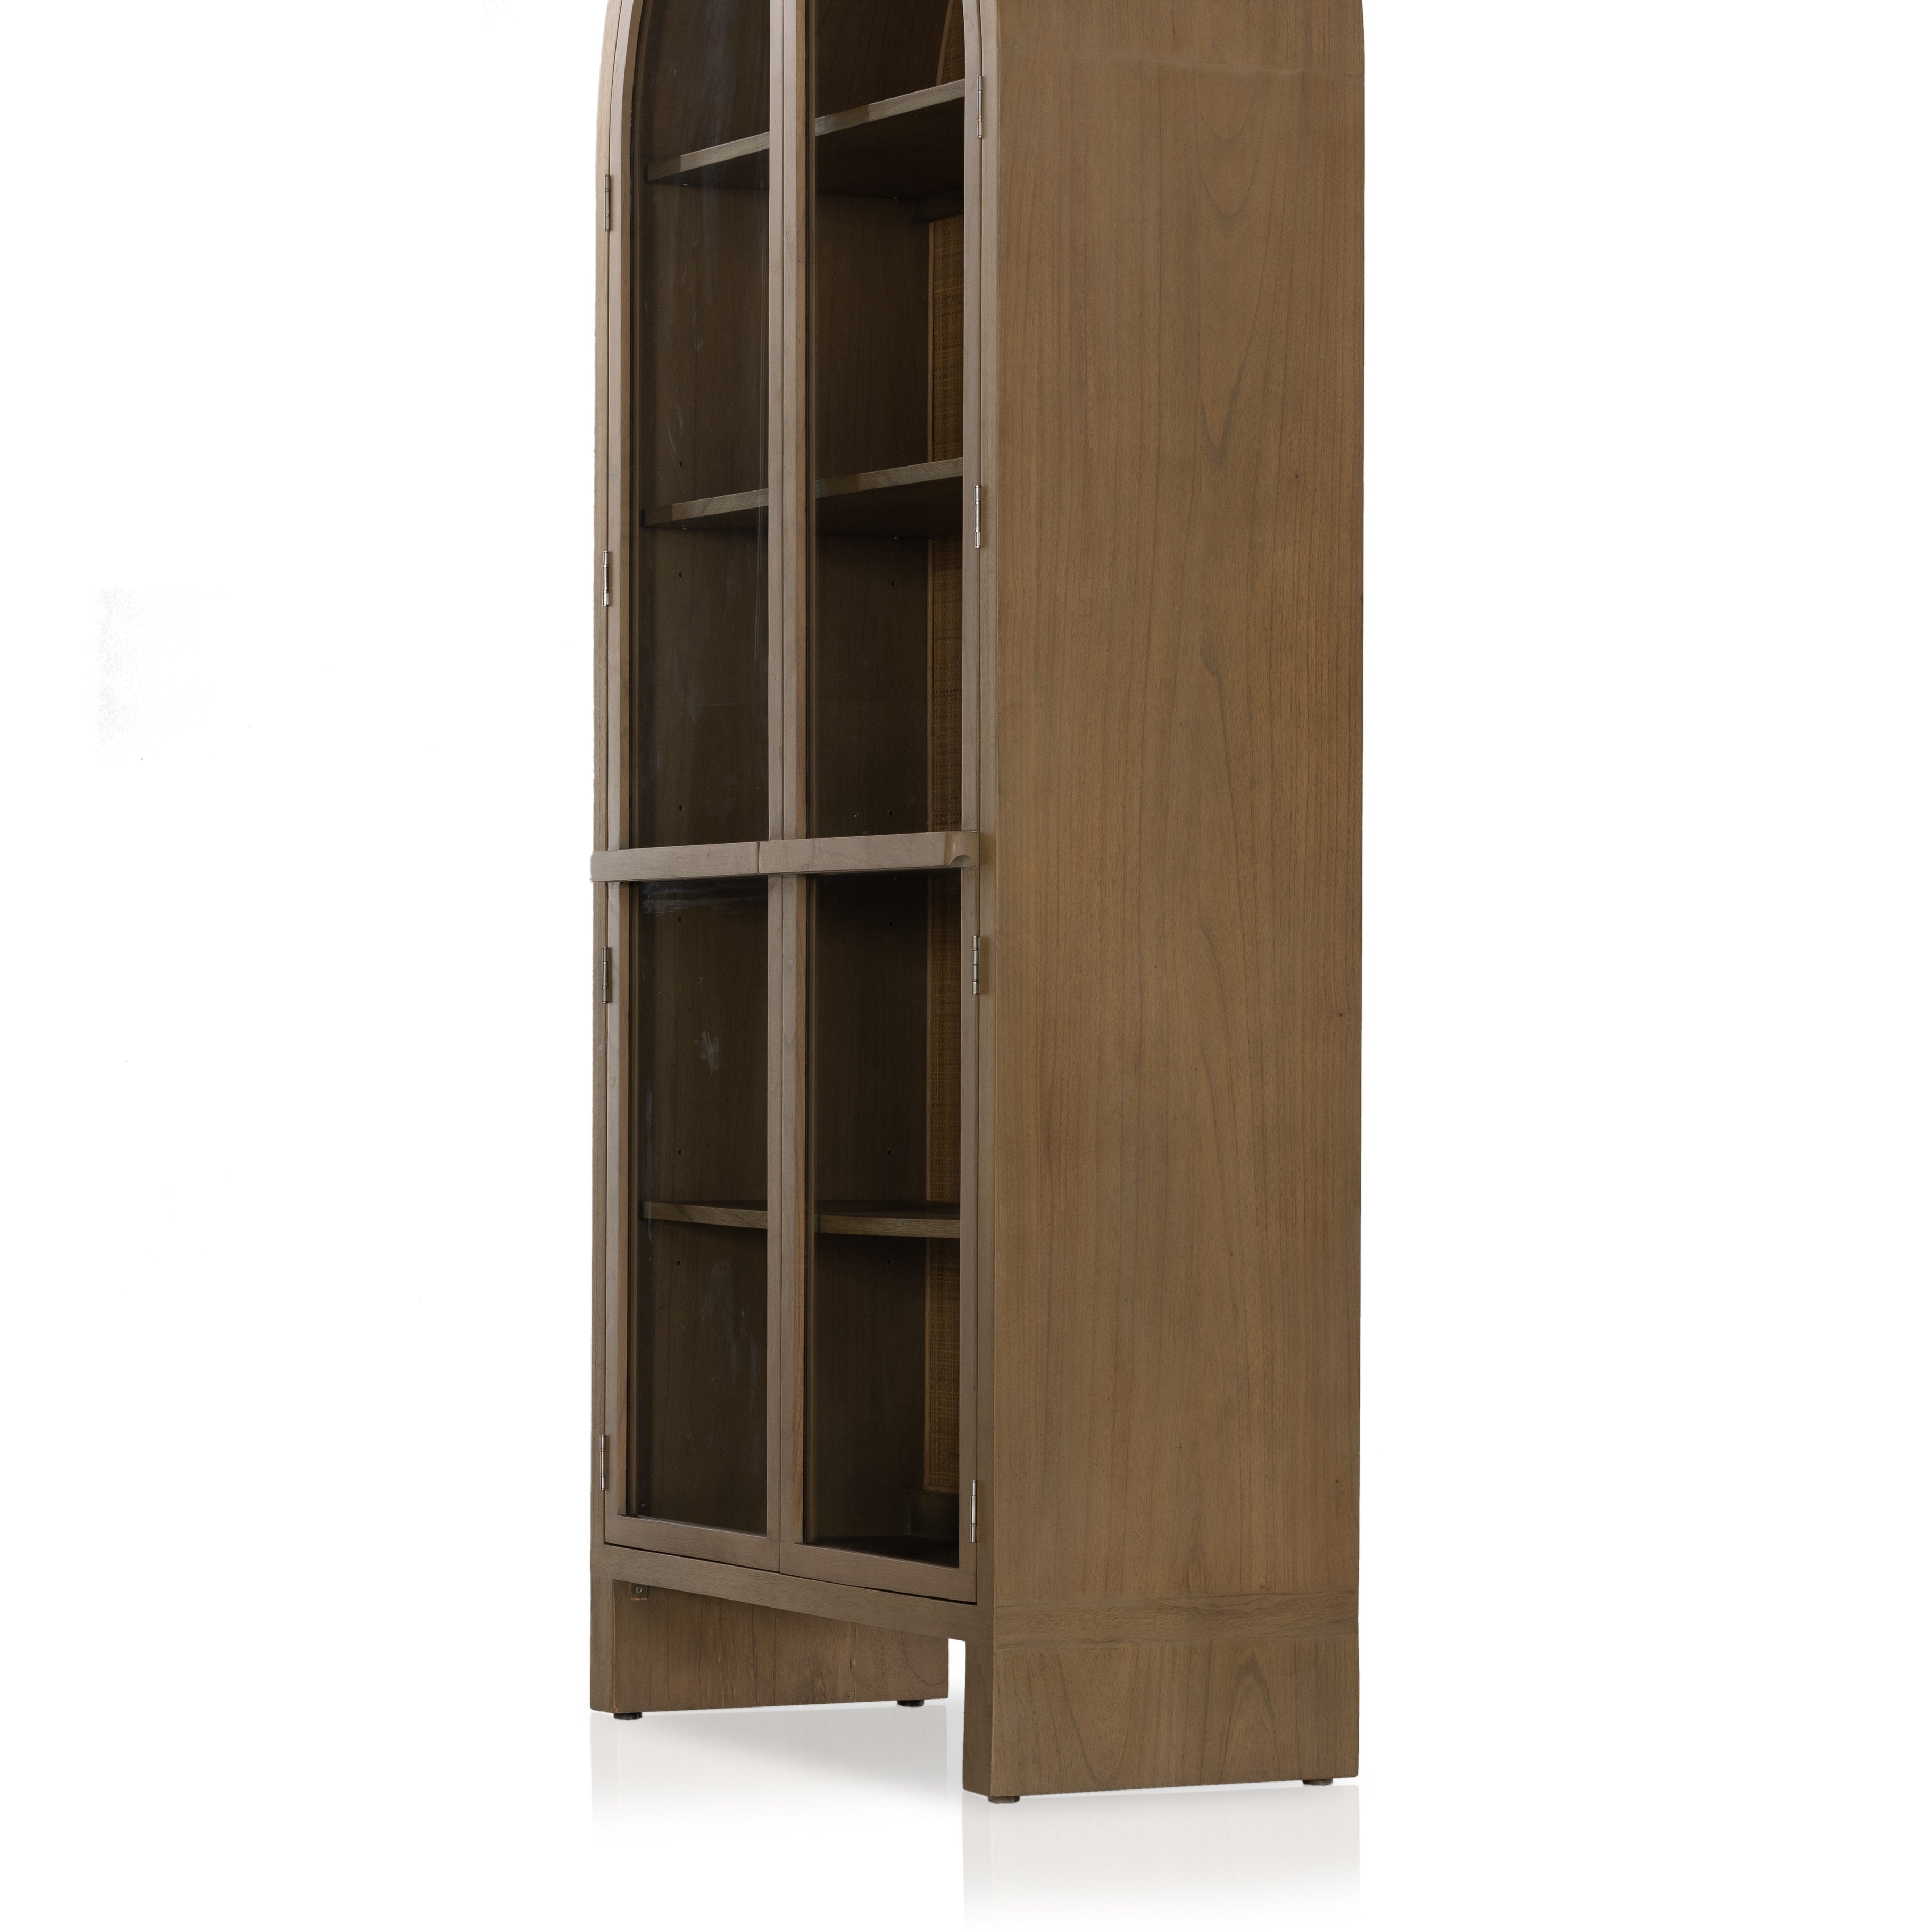 Ilana Burnished Mindi Cabinet forms a dramatic arch this glass-front cabinetry, with woven natural cane backing for a textural finishing touch. Amethyst Home provides interior design services, furniture, rugs, and lighting in the Charlotte metro area.